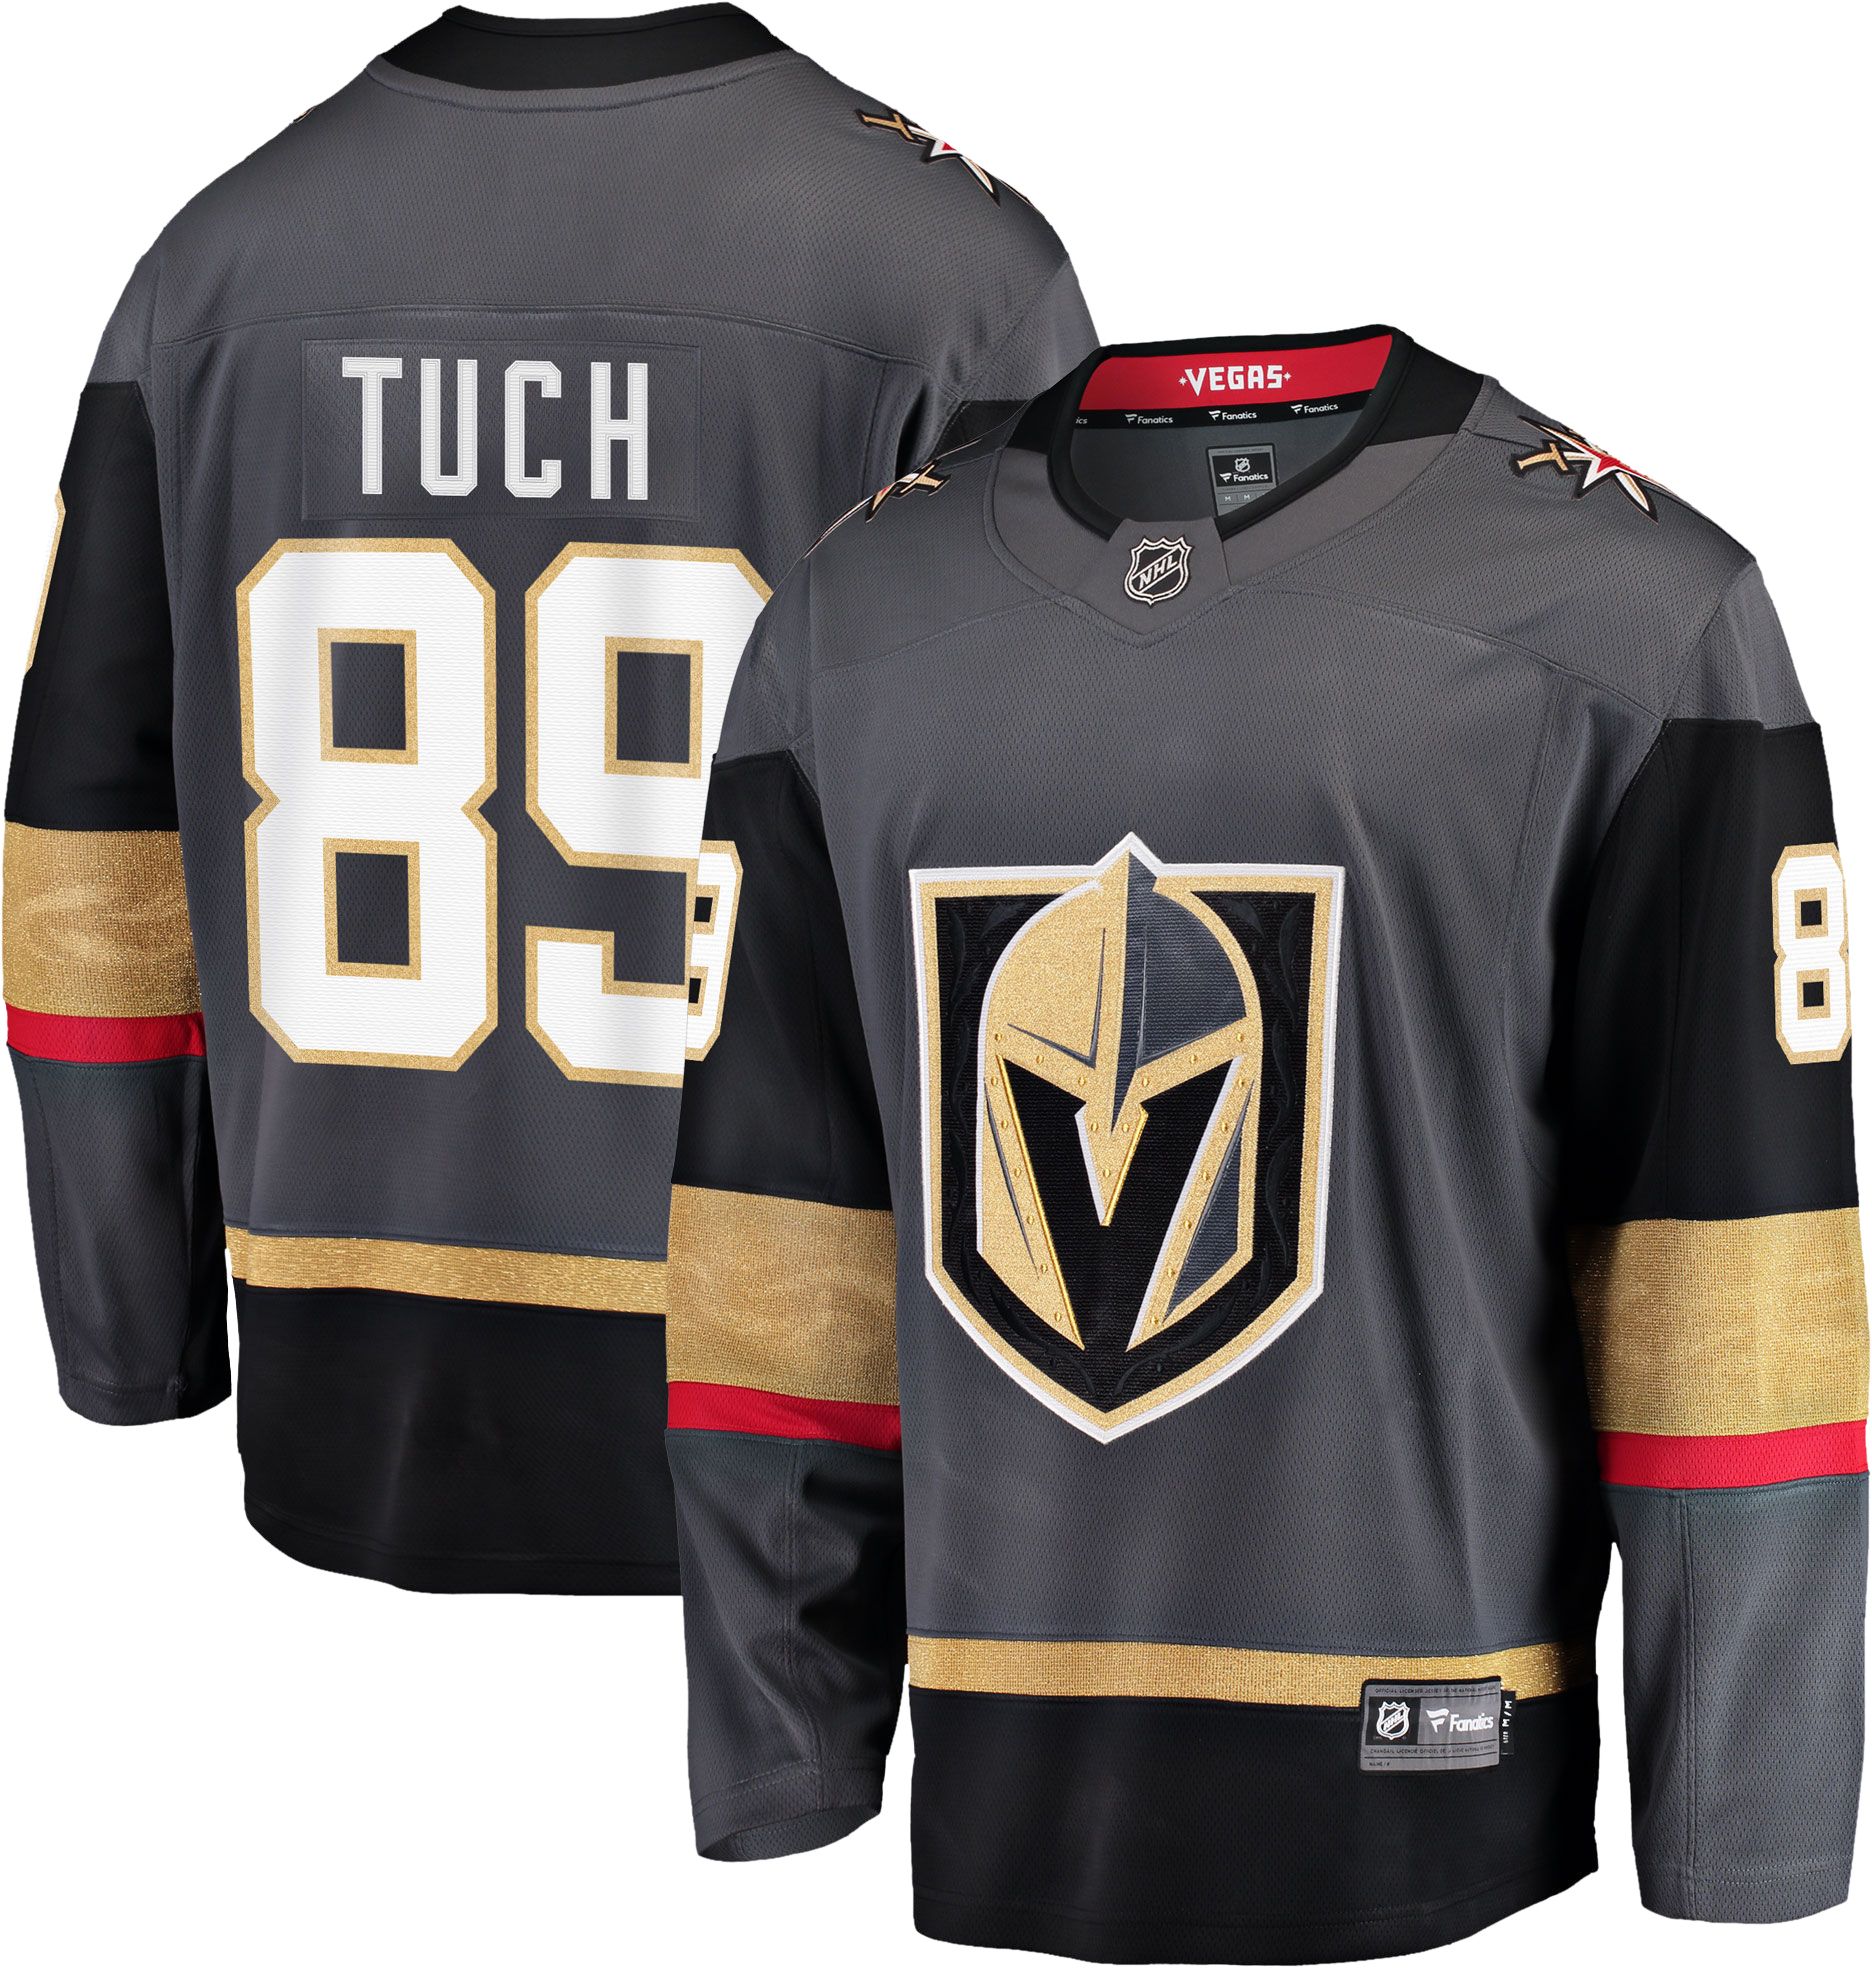 tuch jersey